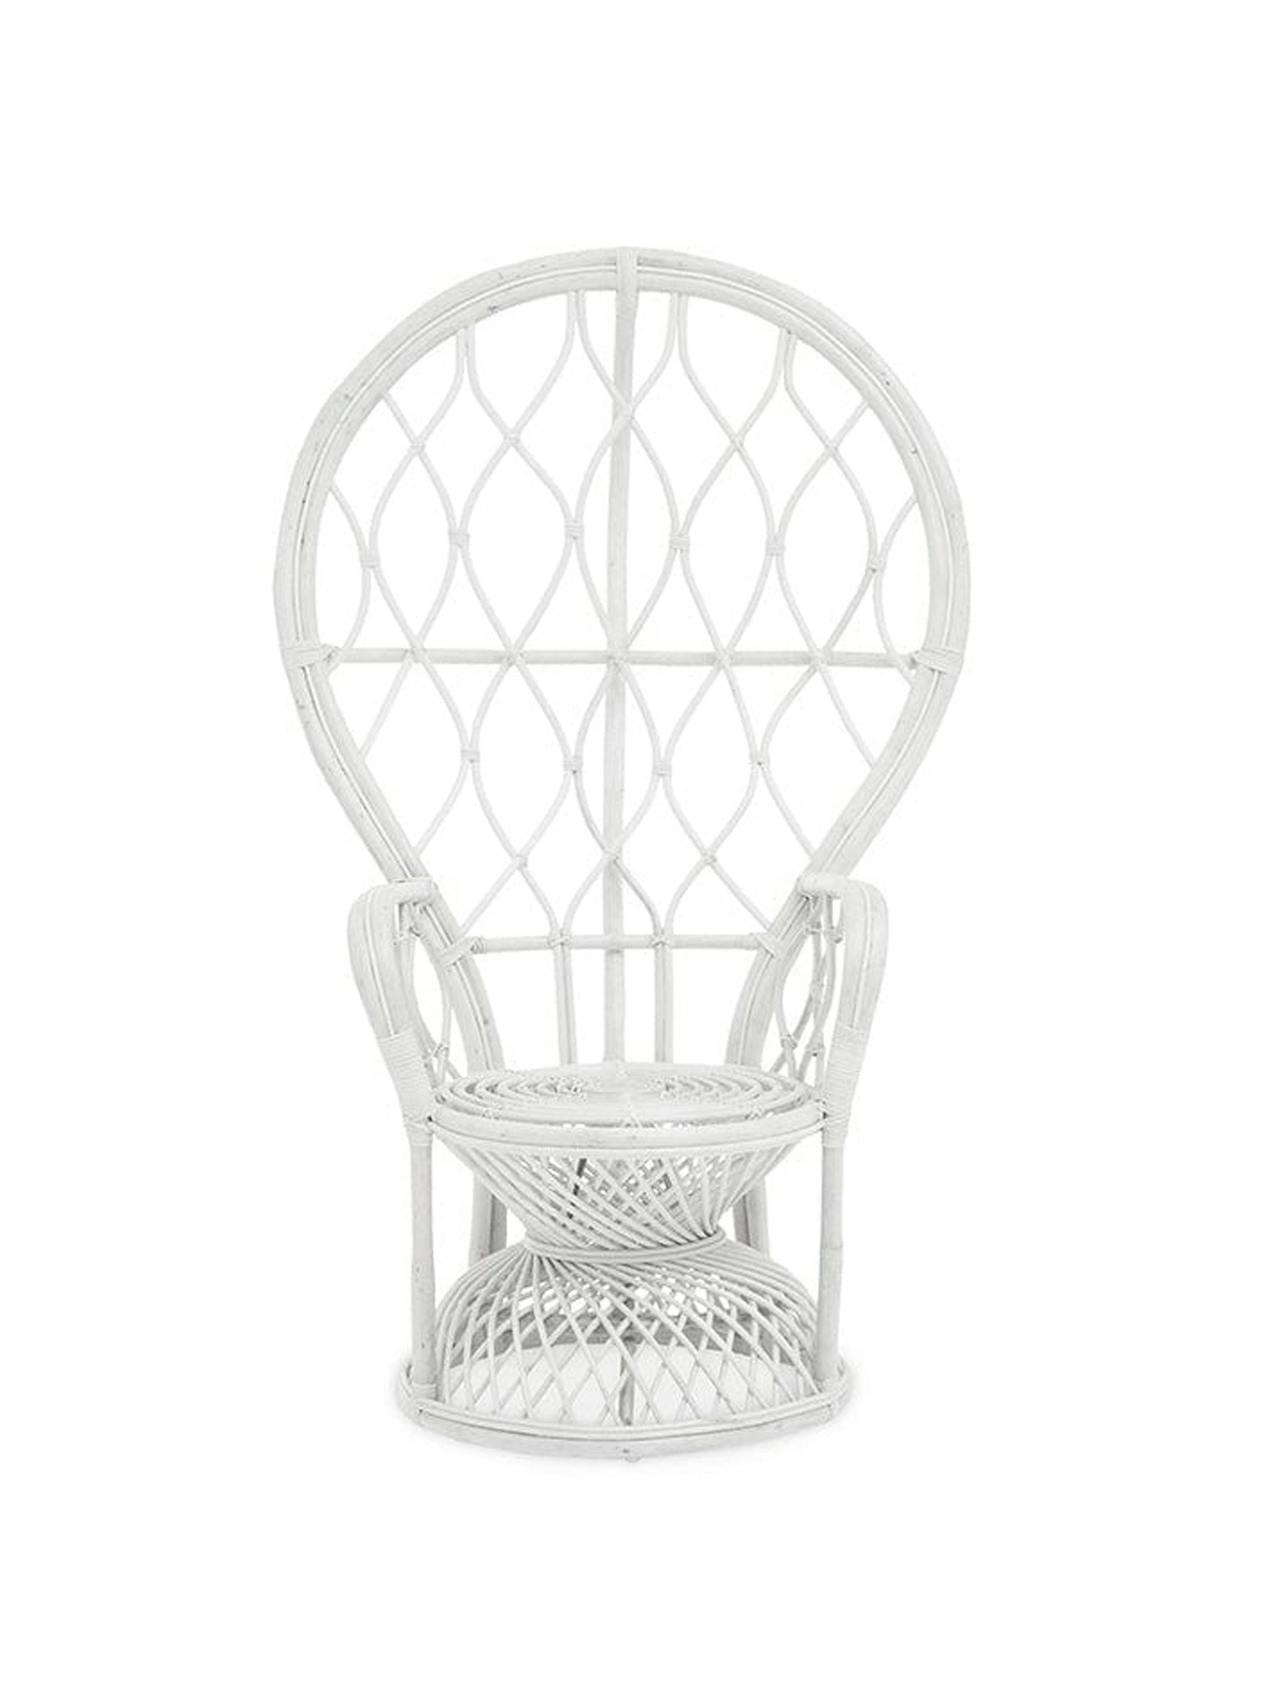 Peacock chair in white